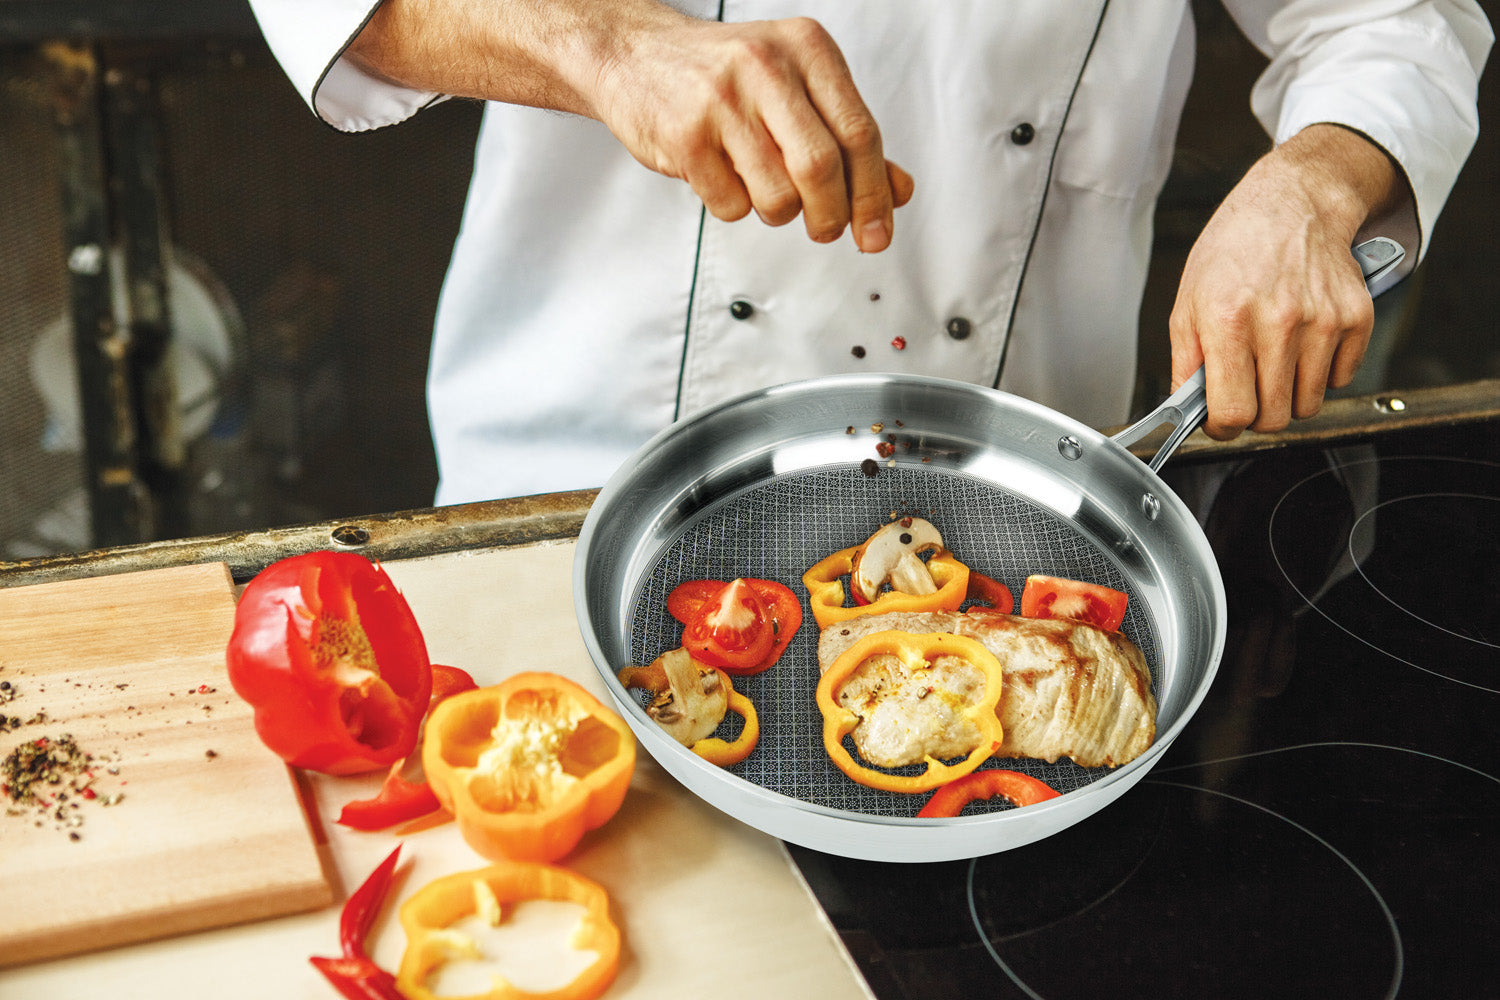 3-PLY FRY PAN & SKILLET  USING TO COOK VEGETABLES AND MUSHROOMS